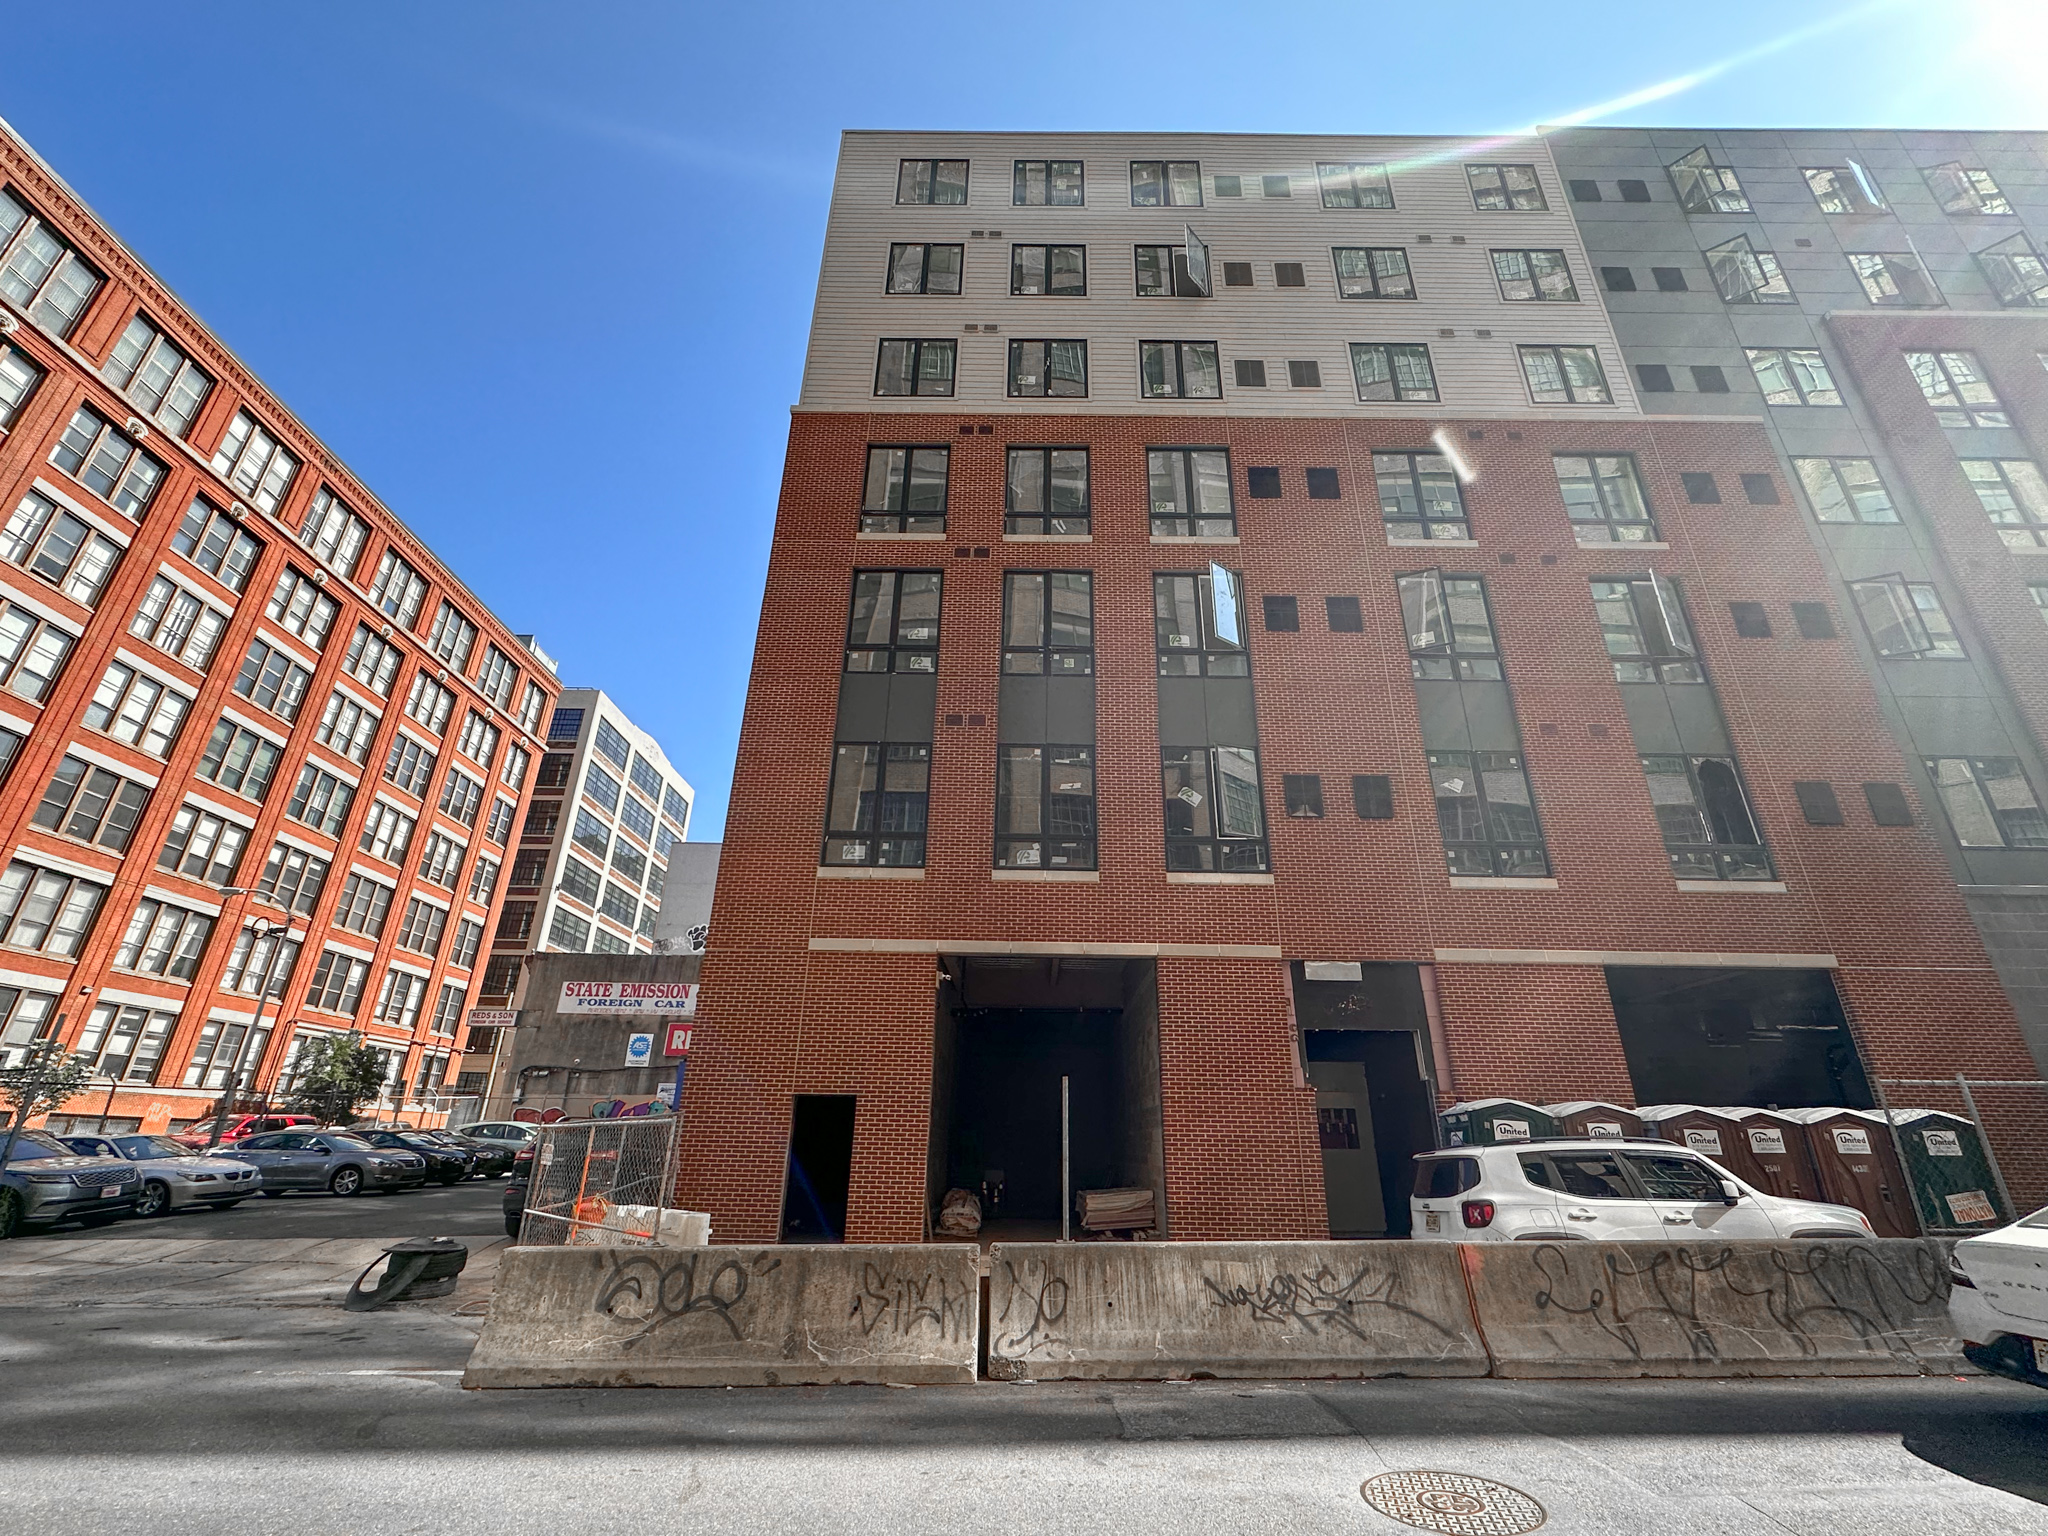 1306-14 Callowhill Street. Photo by Jamie Meller. May 2023